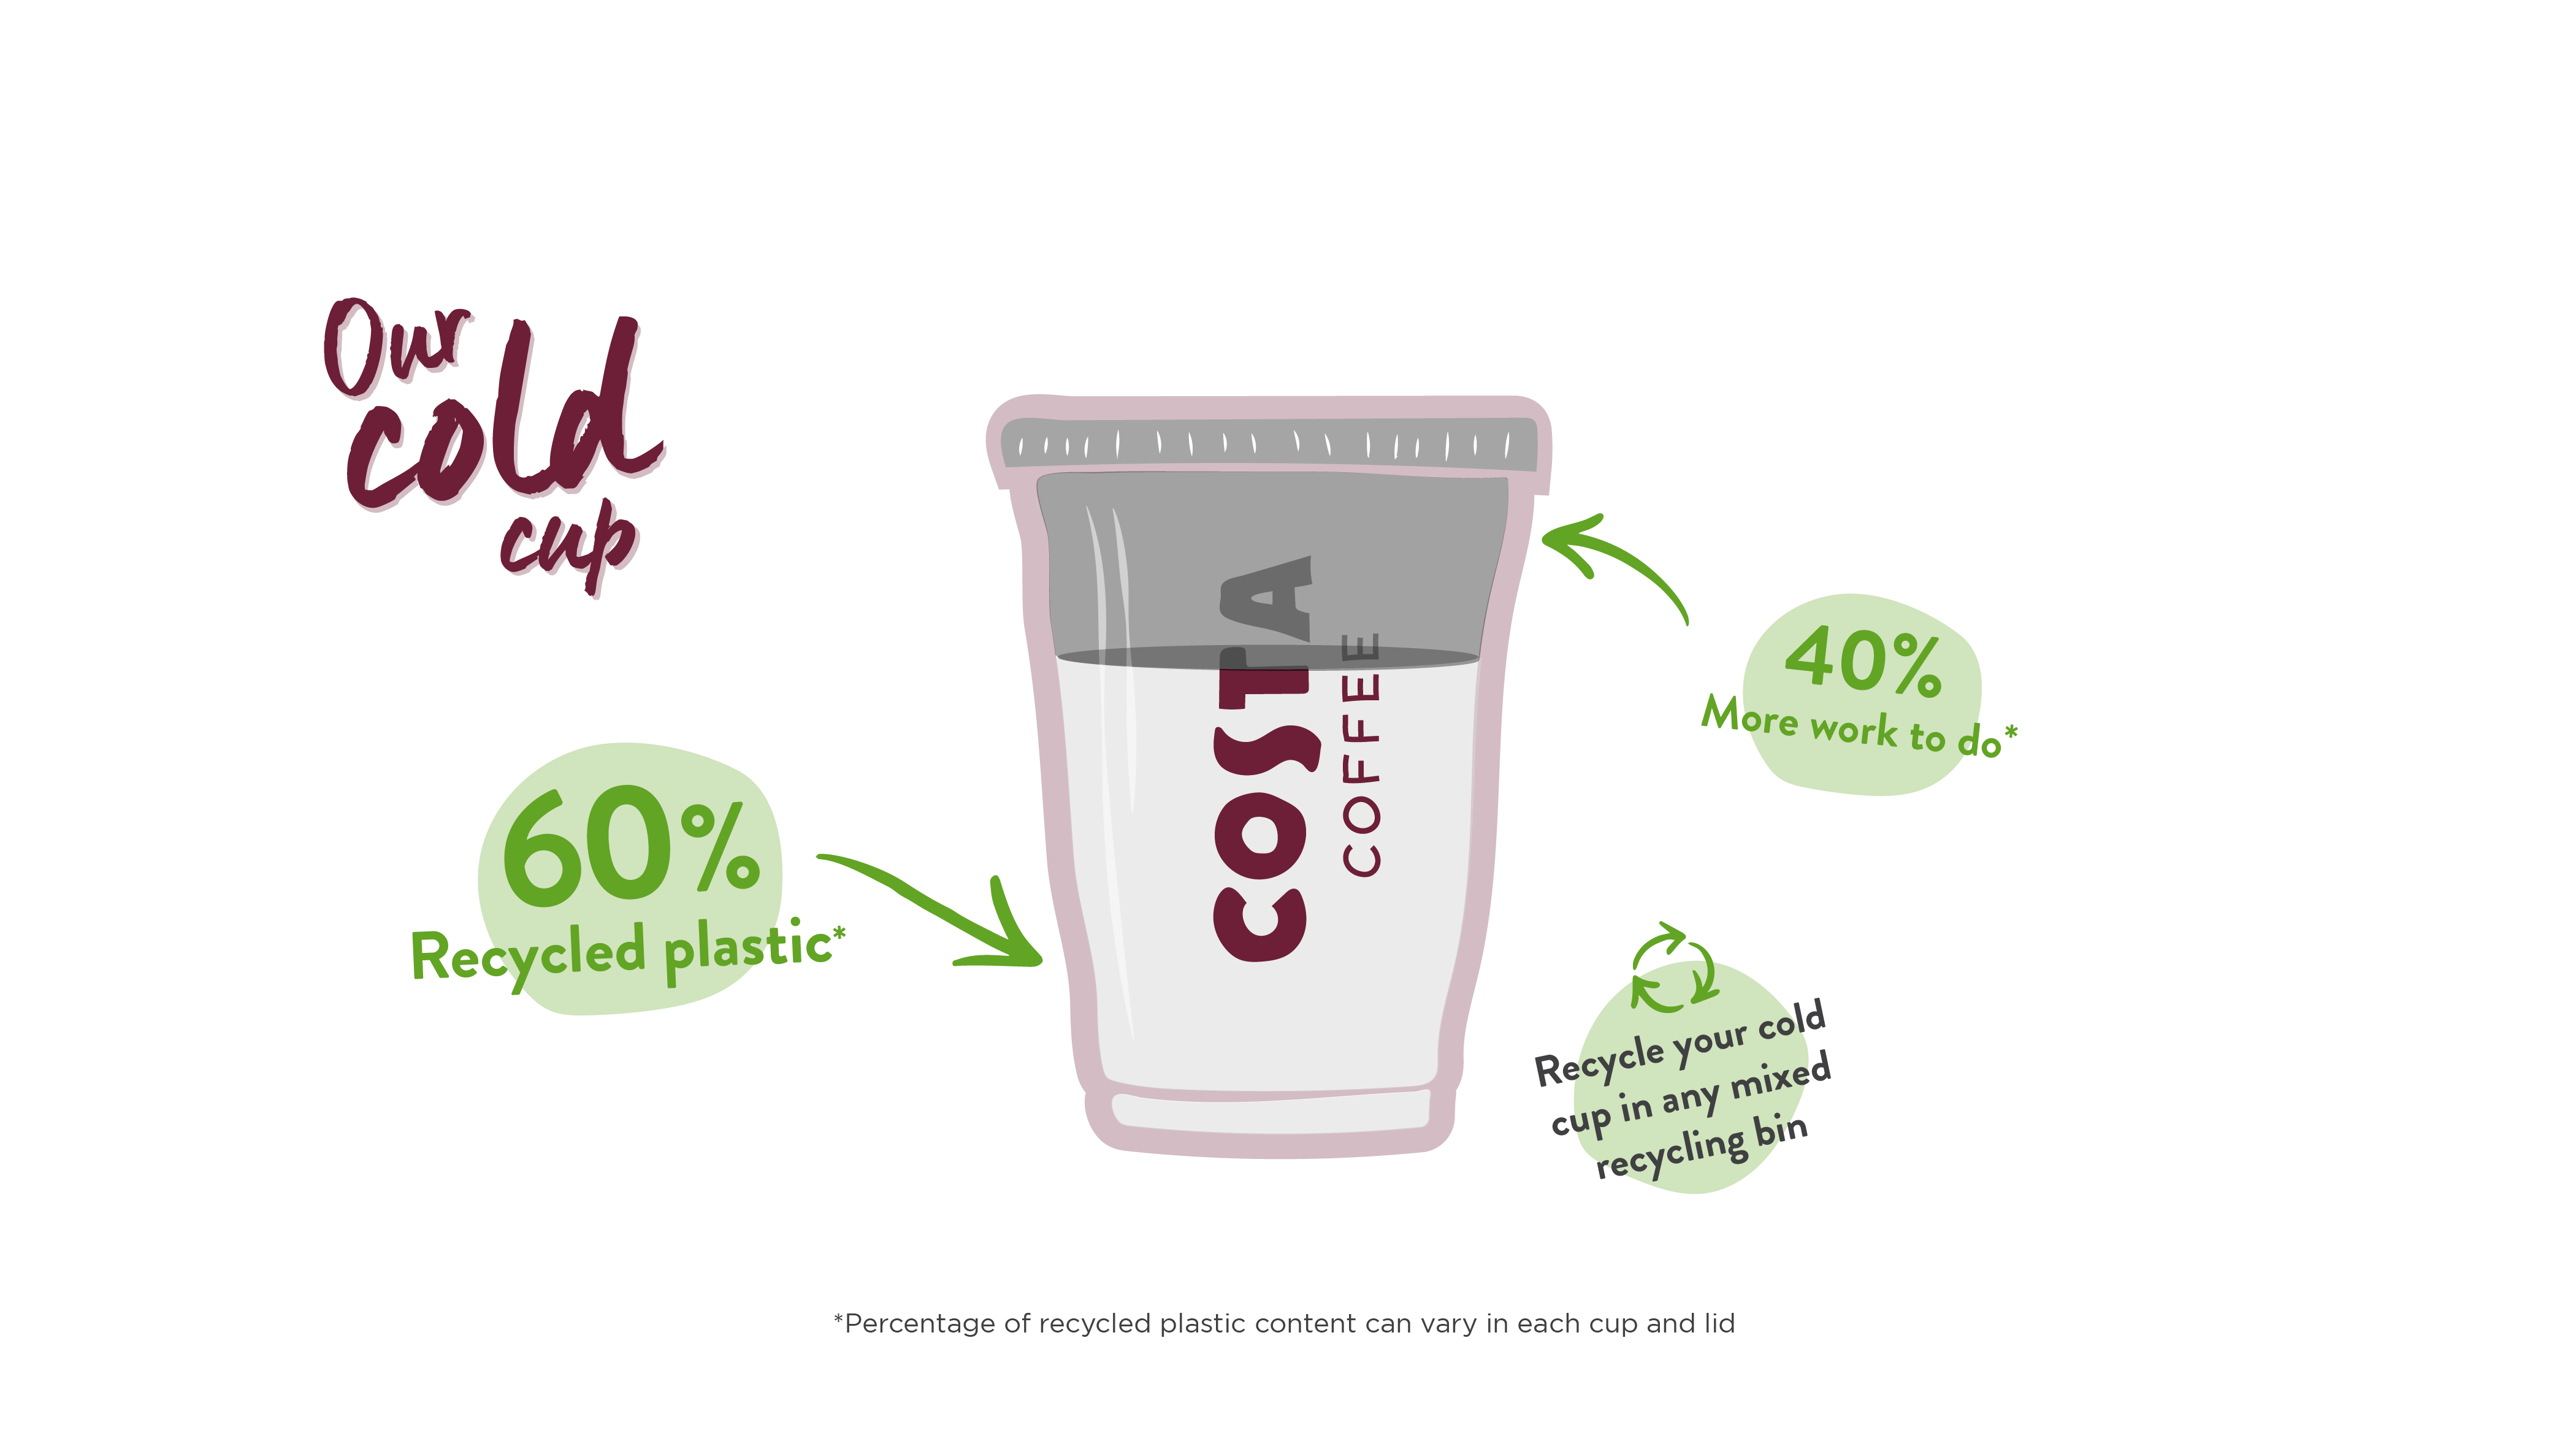 Our cold cup. 60 per cent recycled plastic. 40 per cent more work to do. Recyle your cold cup in any mixed recycling bin. 